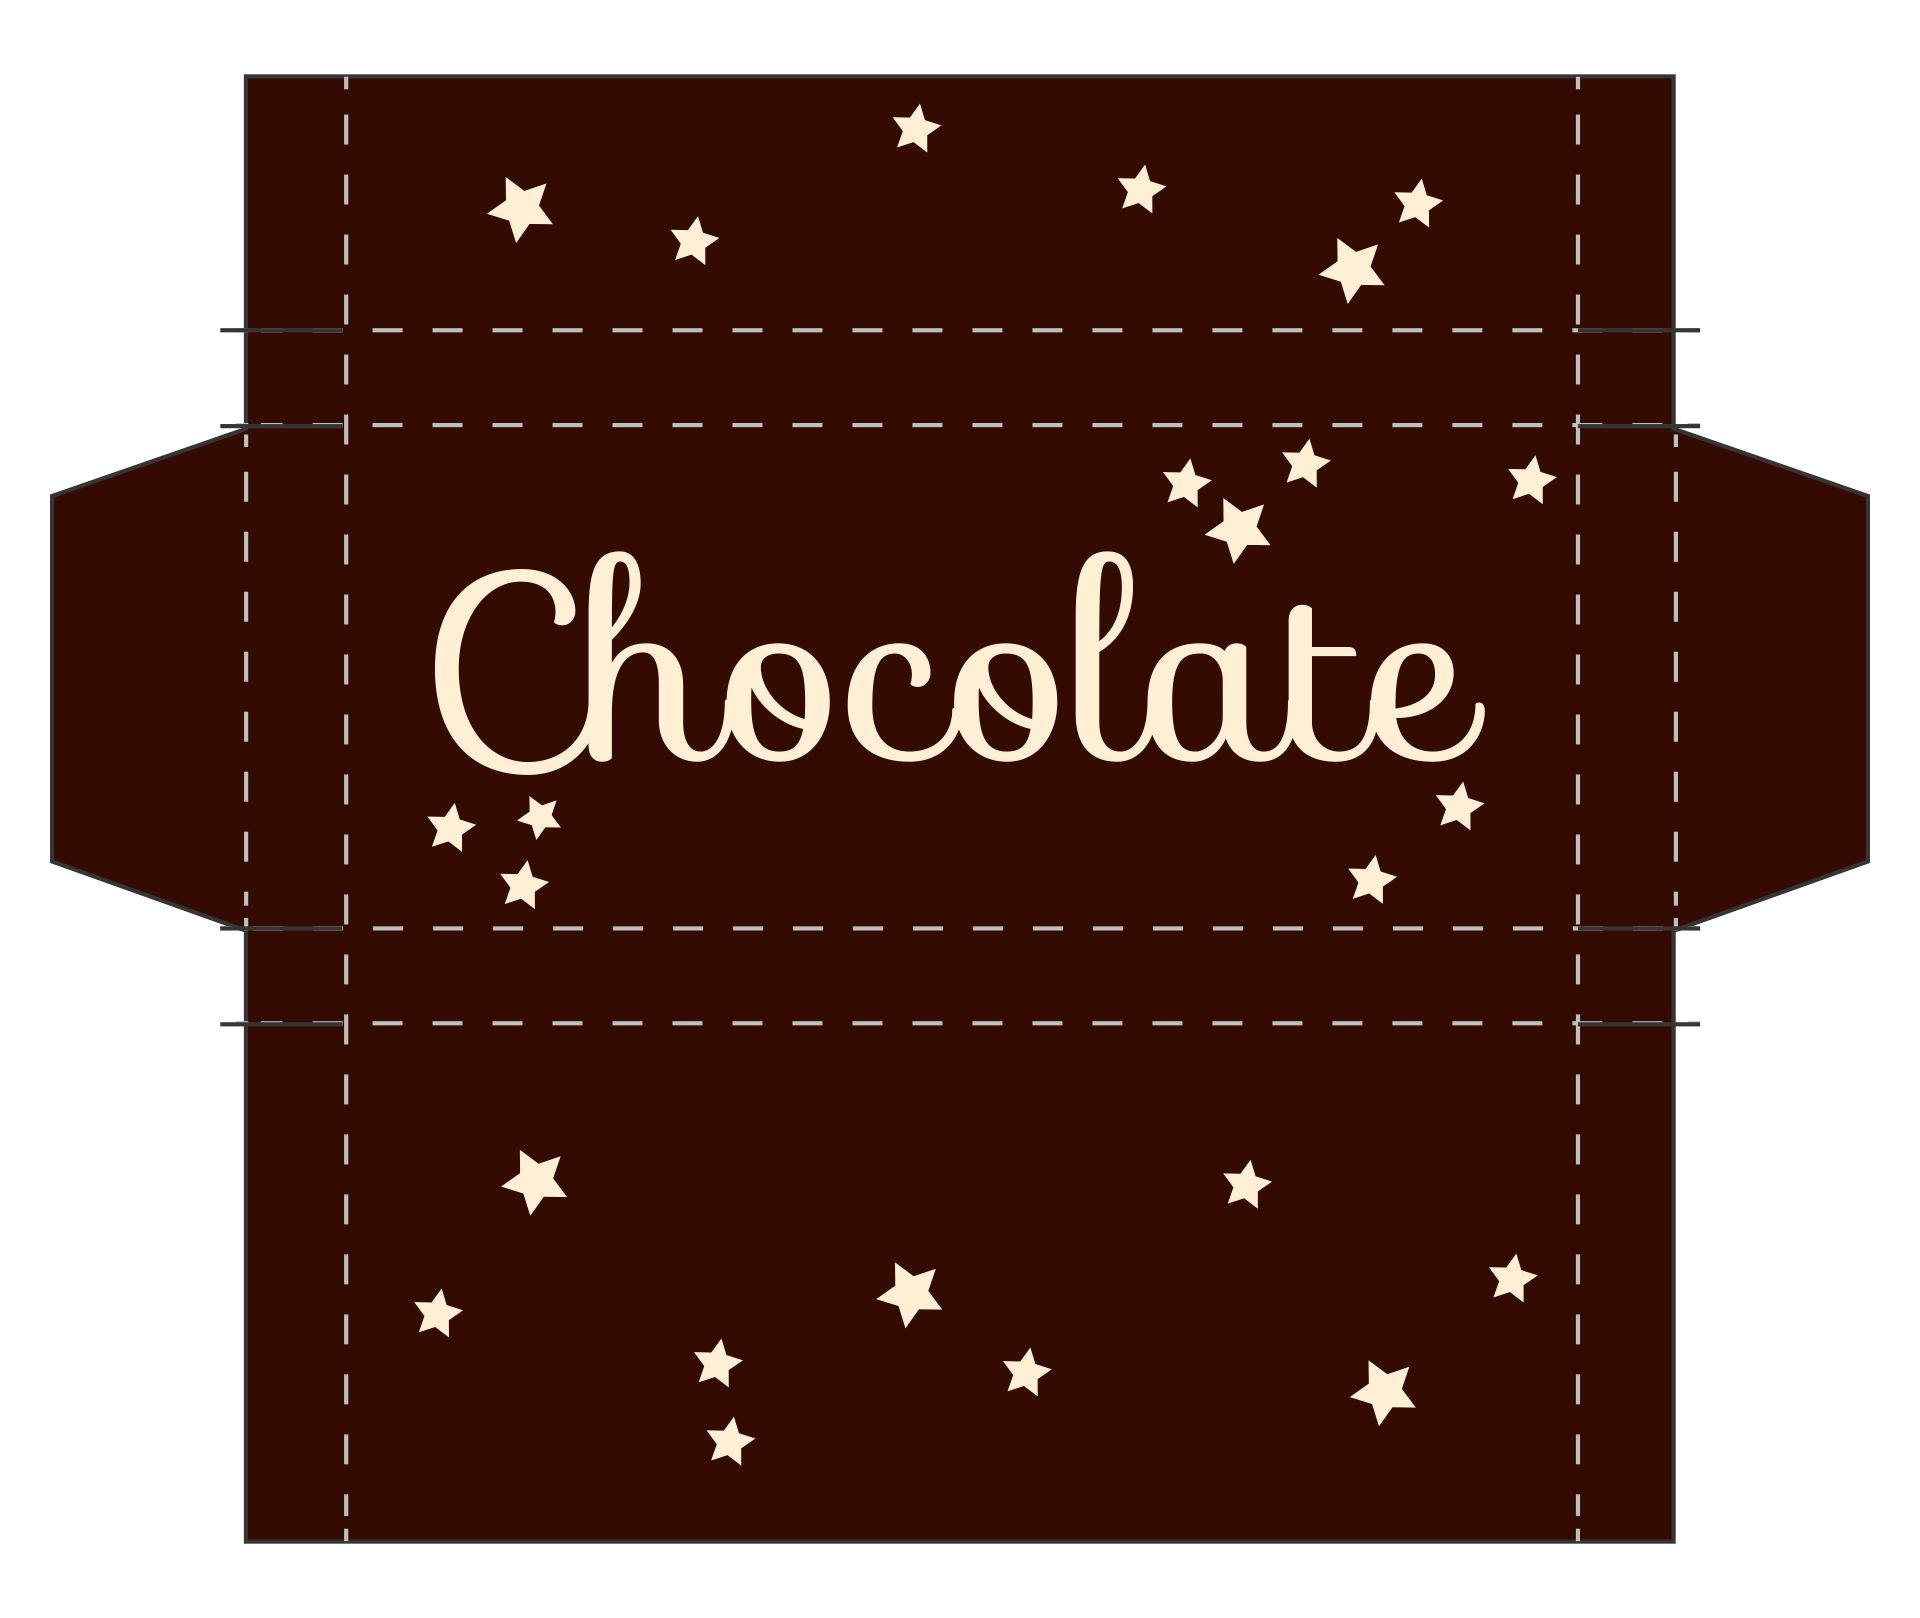 free hershey bar candy wrapper template